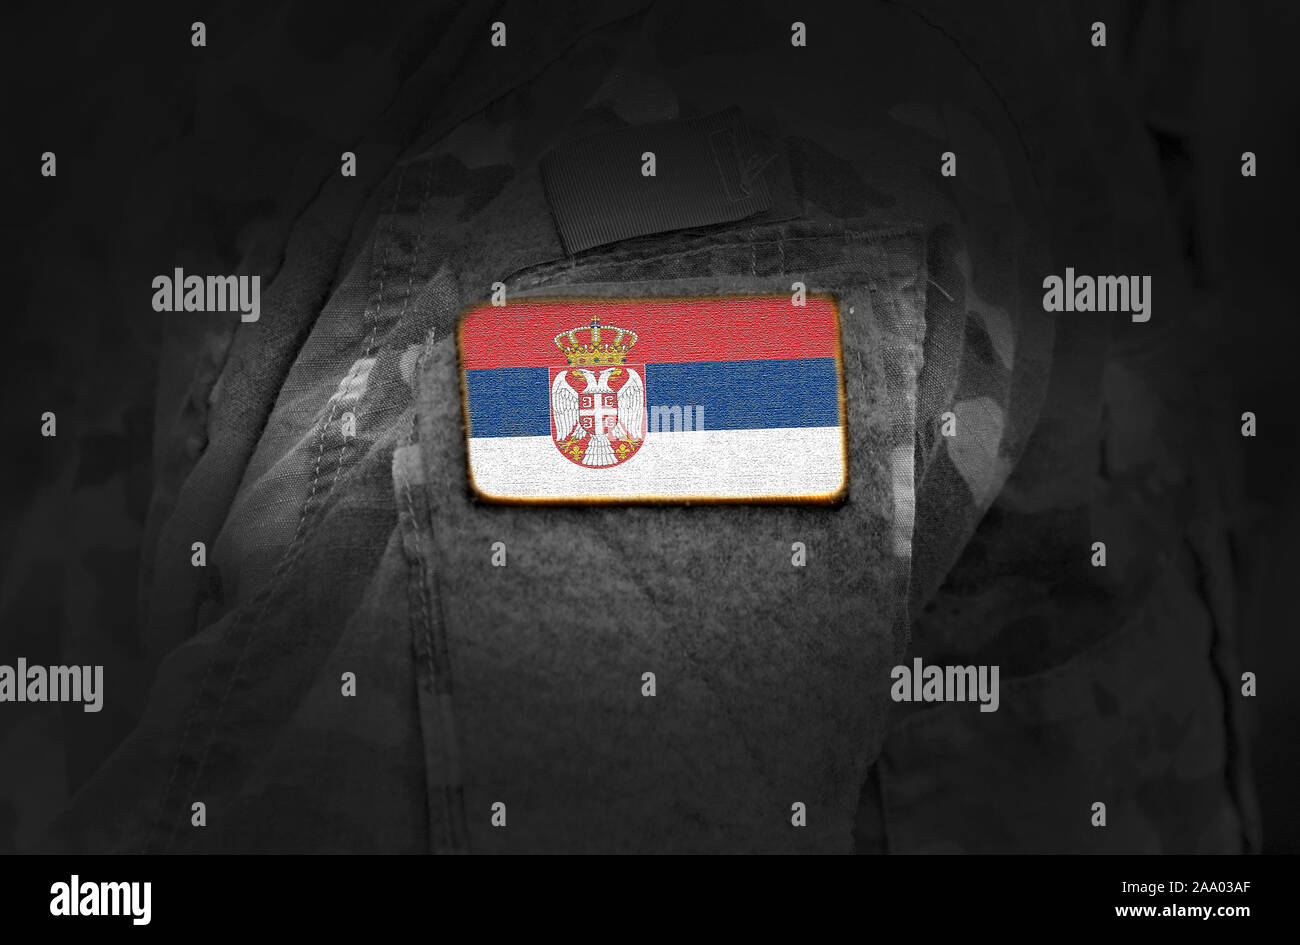 Flag of Serbia on military uniform. Army, armed forces, soldiers. Collage. Stock Photo